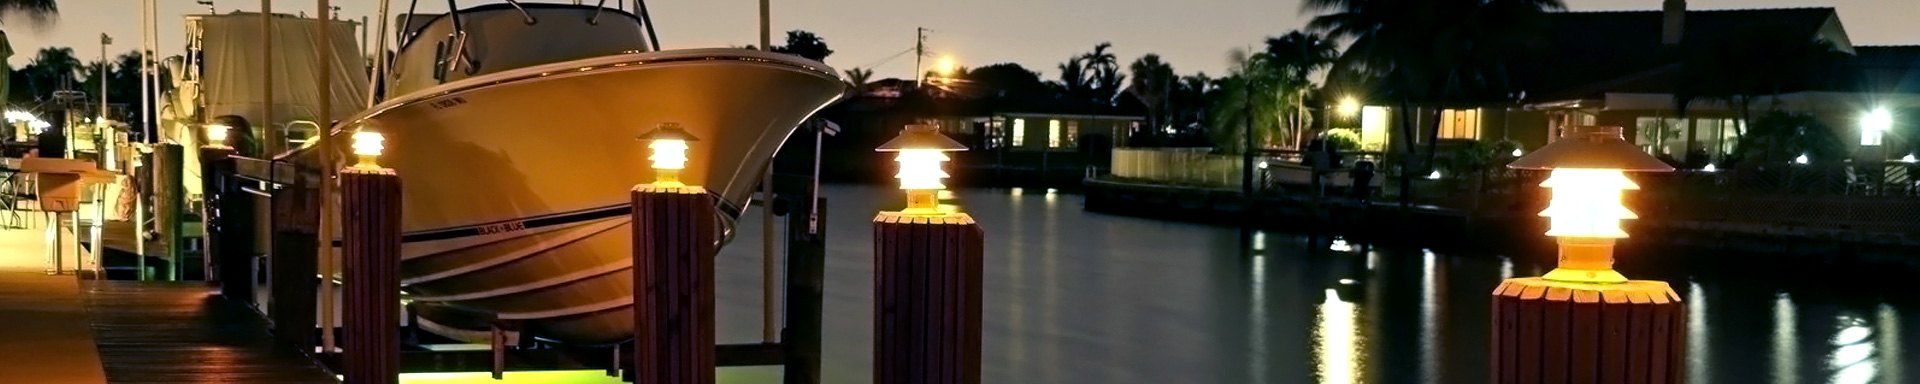 Dock Lighting Is an Essential Part of Your Boating Experience